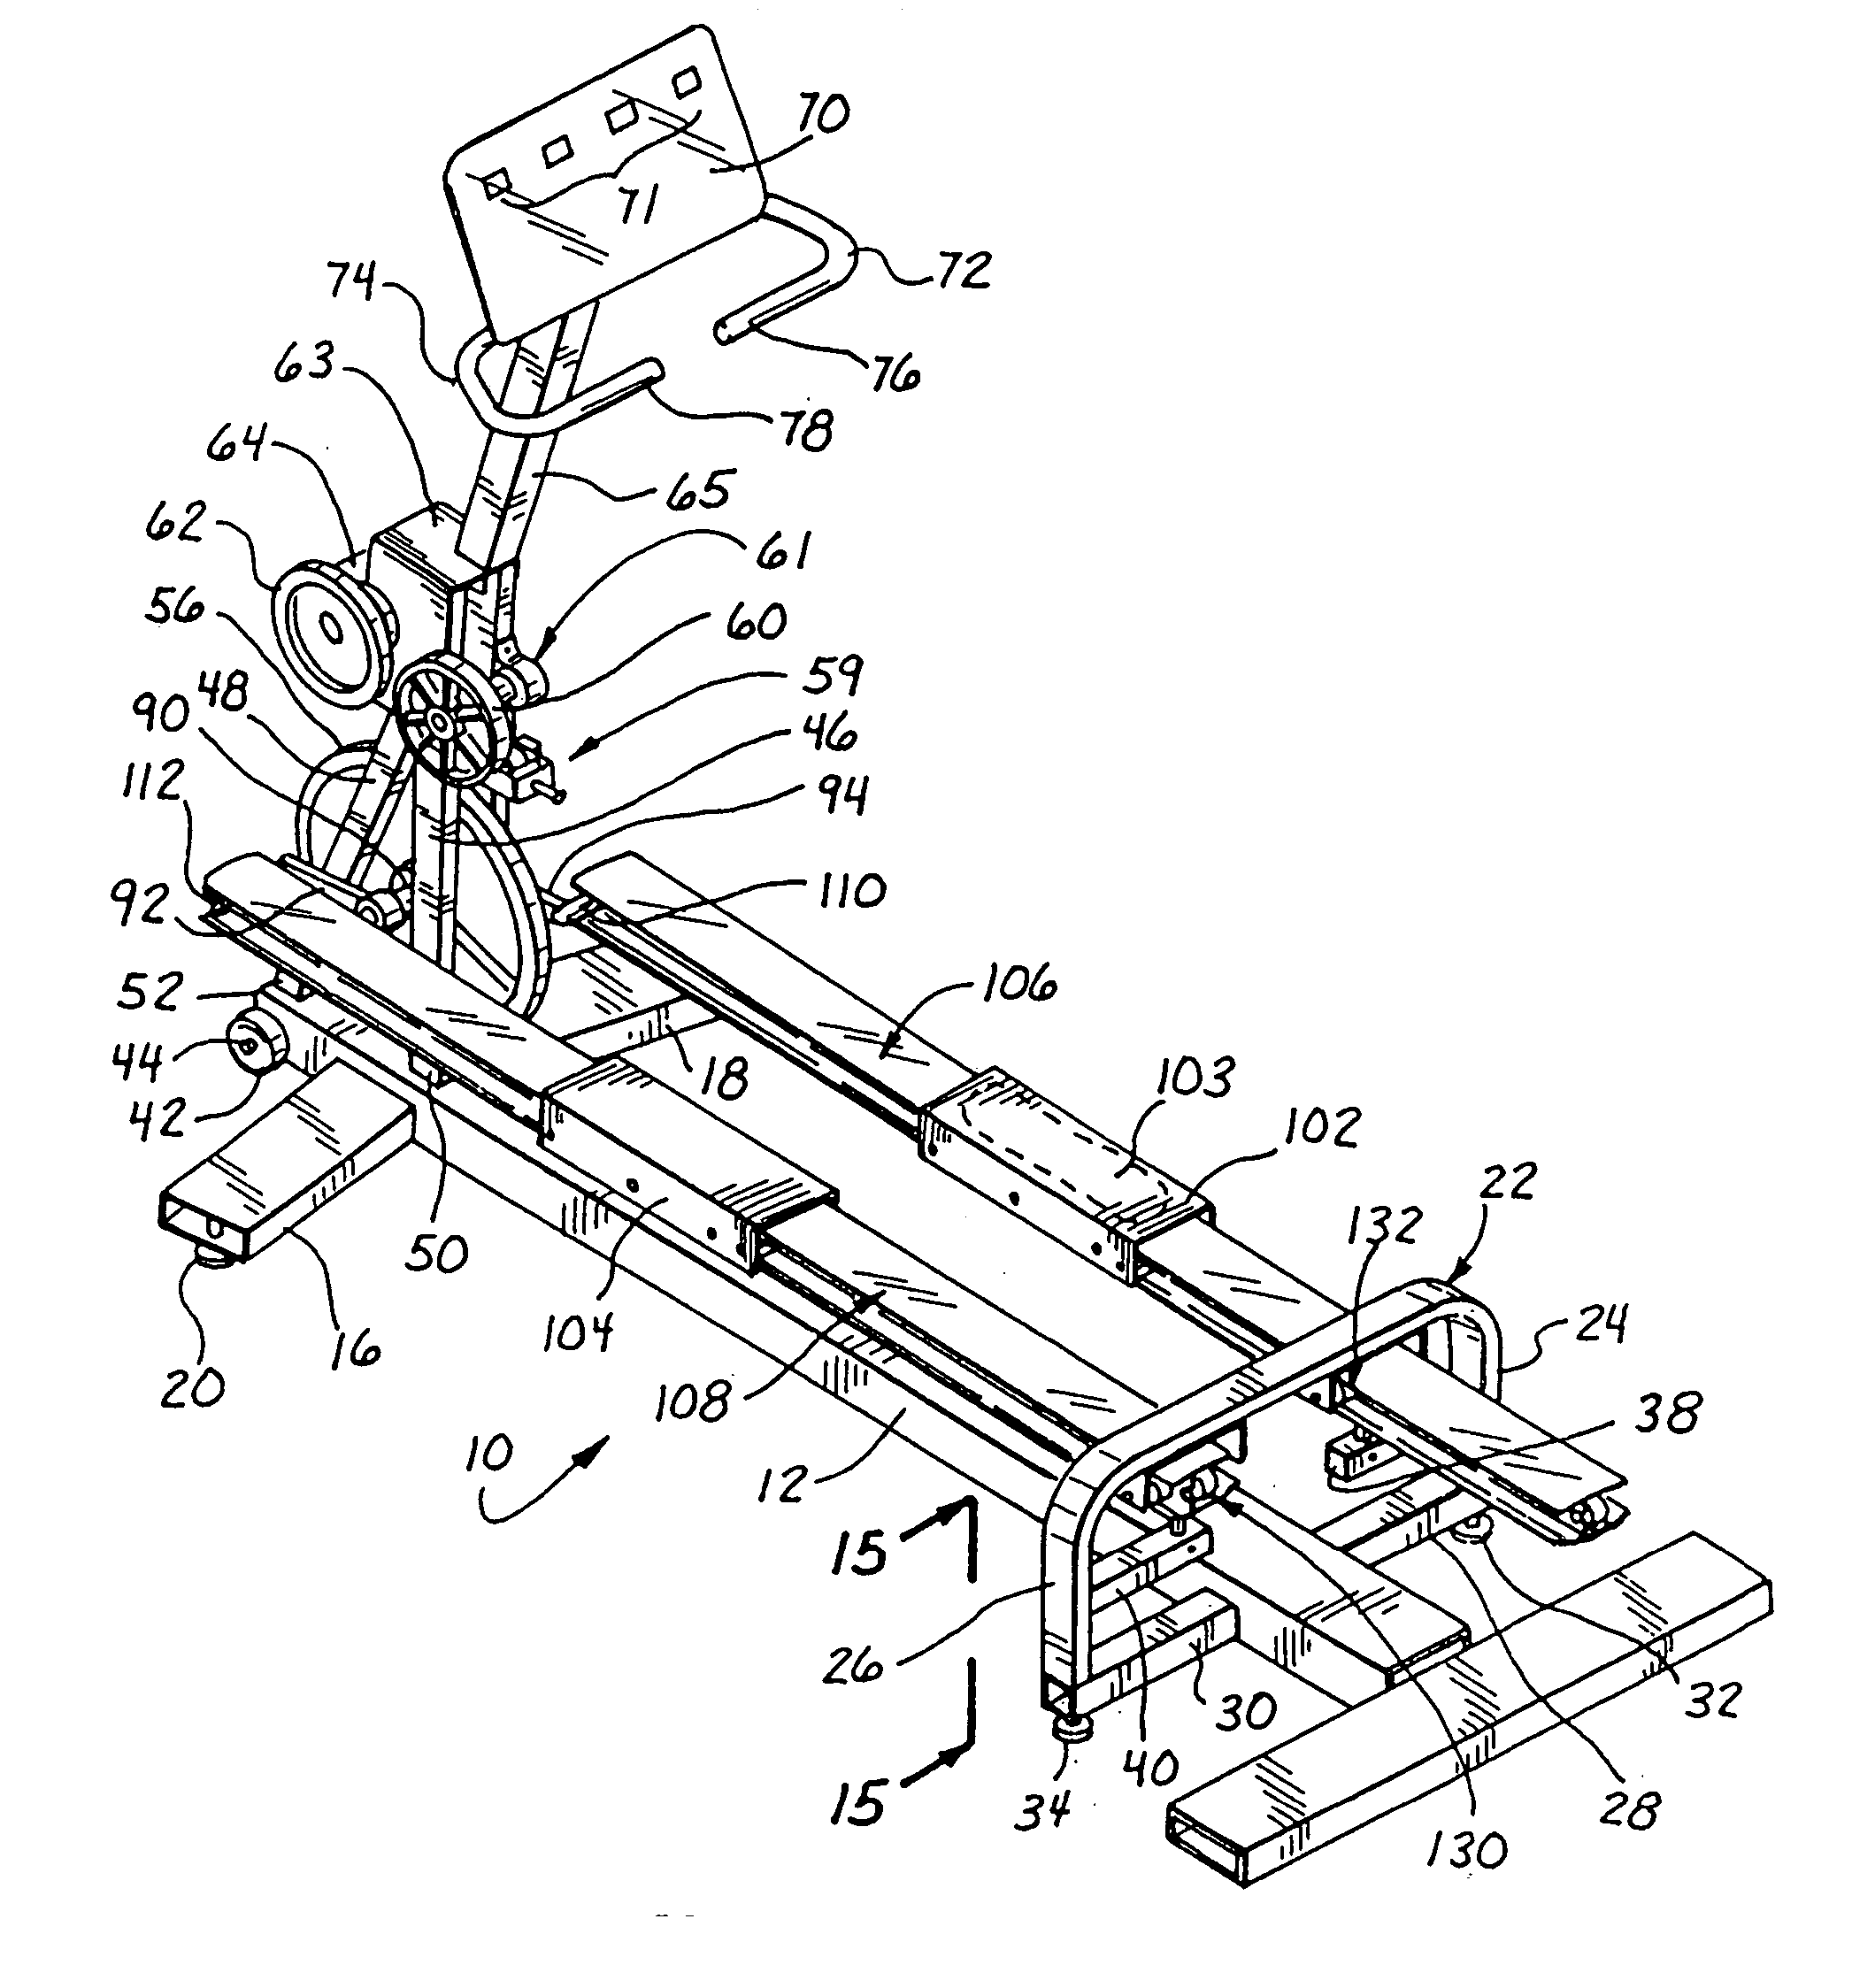 Elliptical exercise device and arm linkage